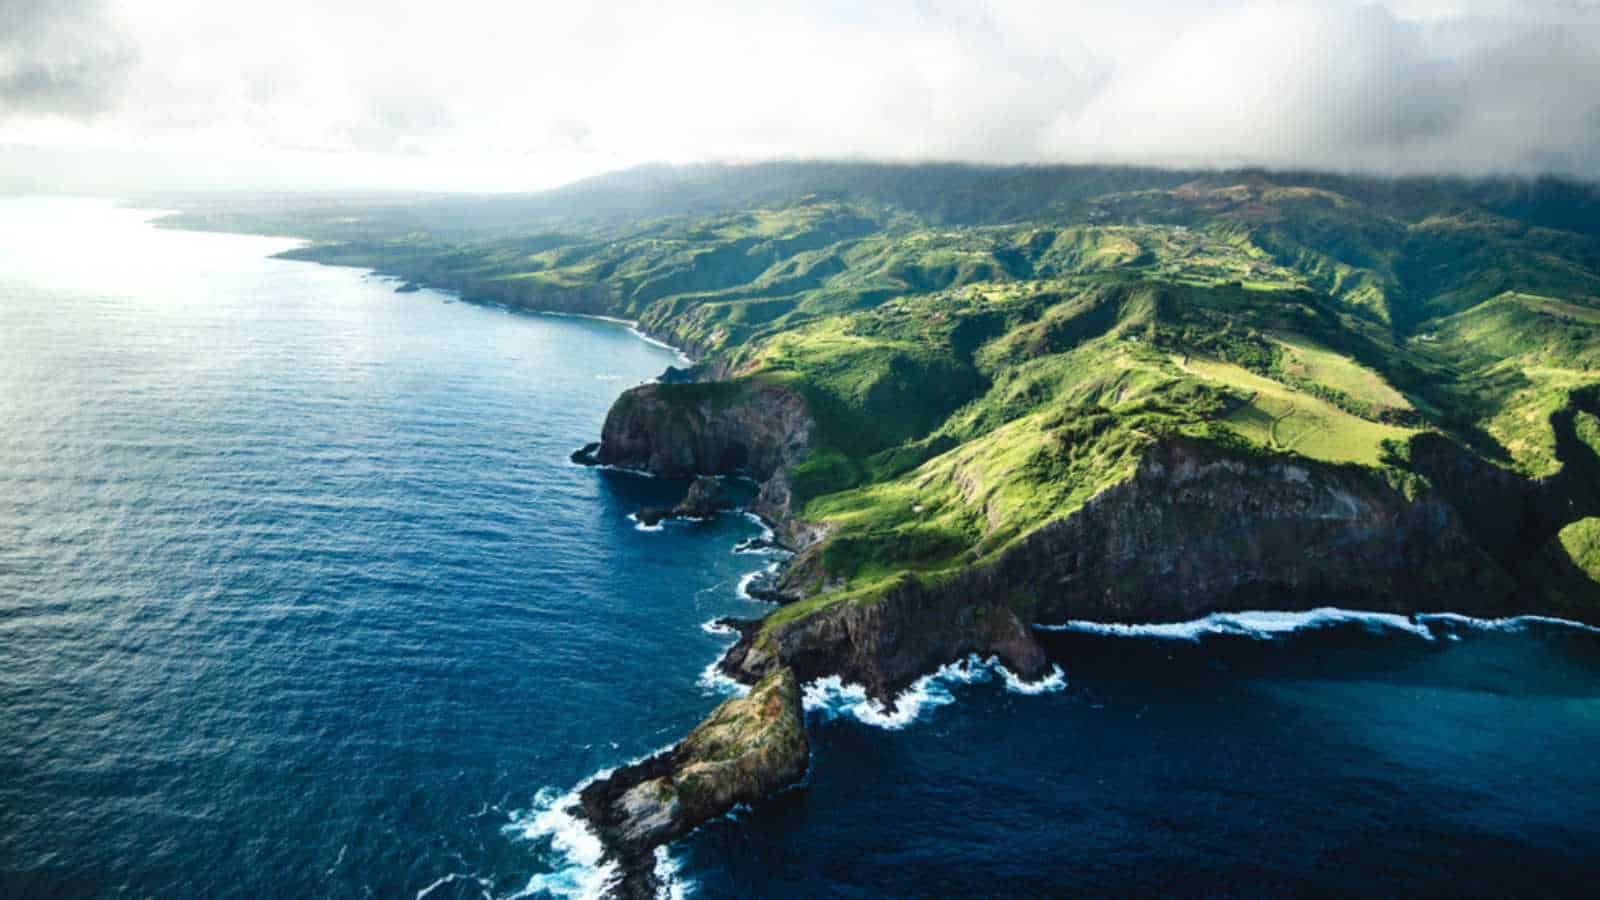 Beautiful Aerial View of Tropical Island Paradise Nature Scene of Maui Hawaii On Clear Sunny Day with Vibrant Blue Ocean Water and Waves and Lush Green Mountain Scenic Landscape